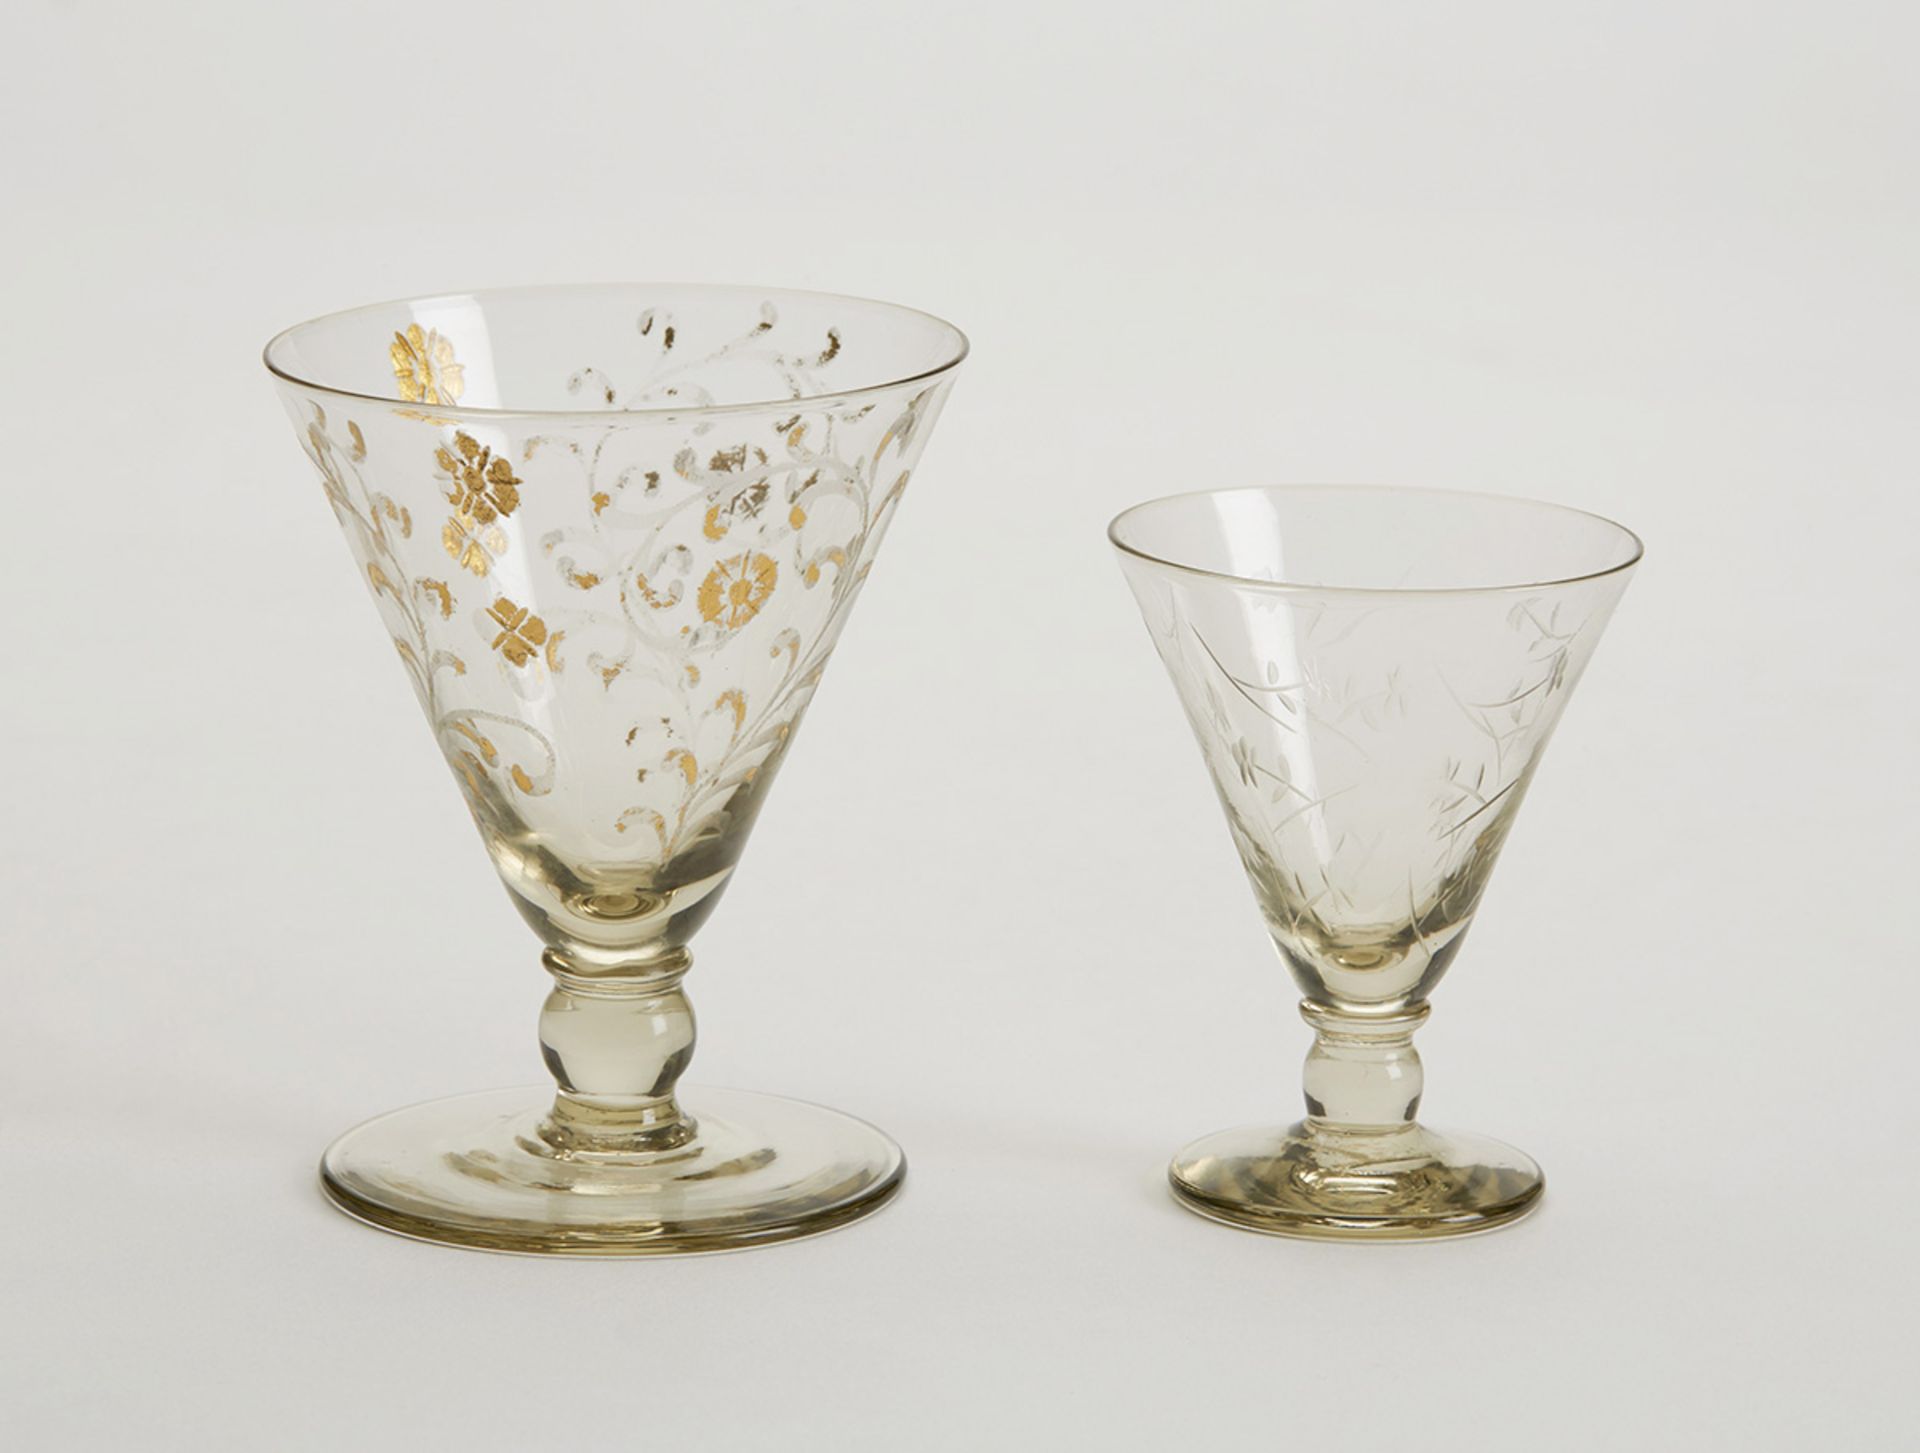 TWO CONTINENTAL ENGRAVED ETCHED WINE GLASSES 20TH C.